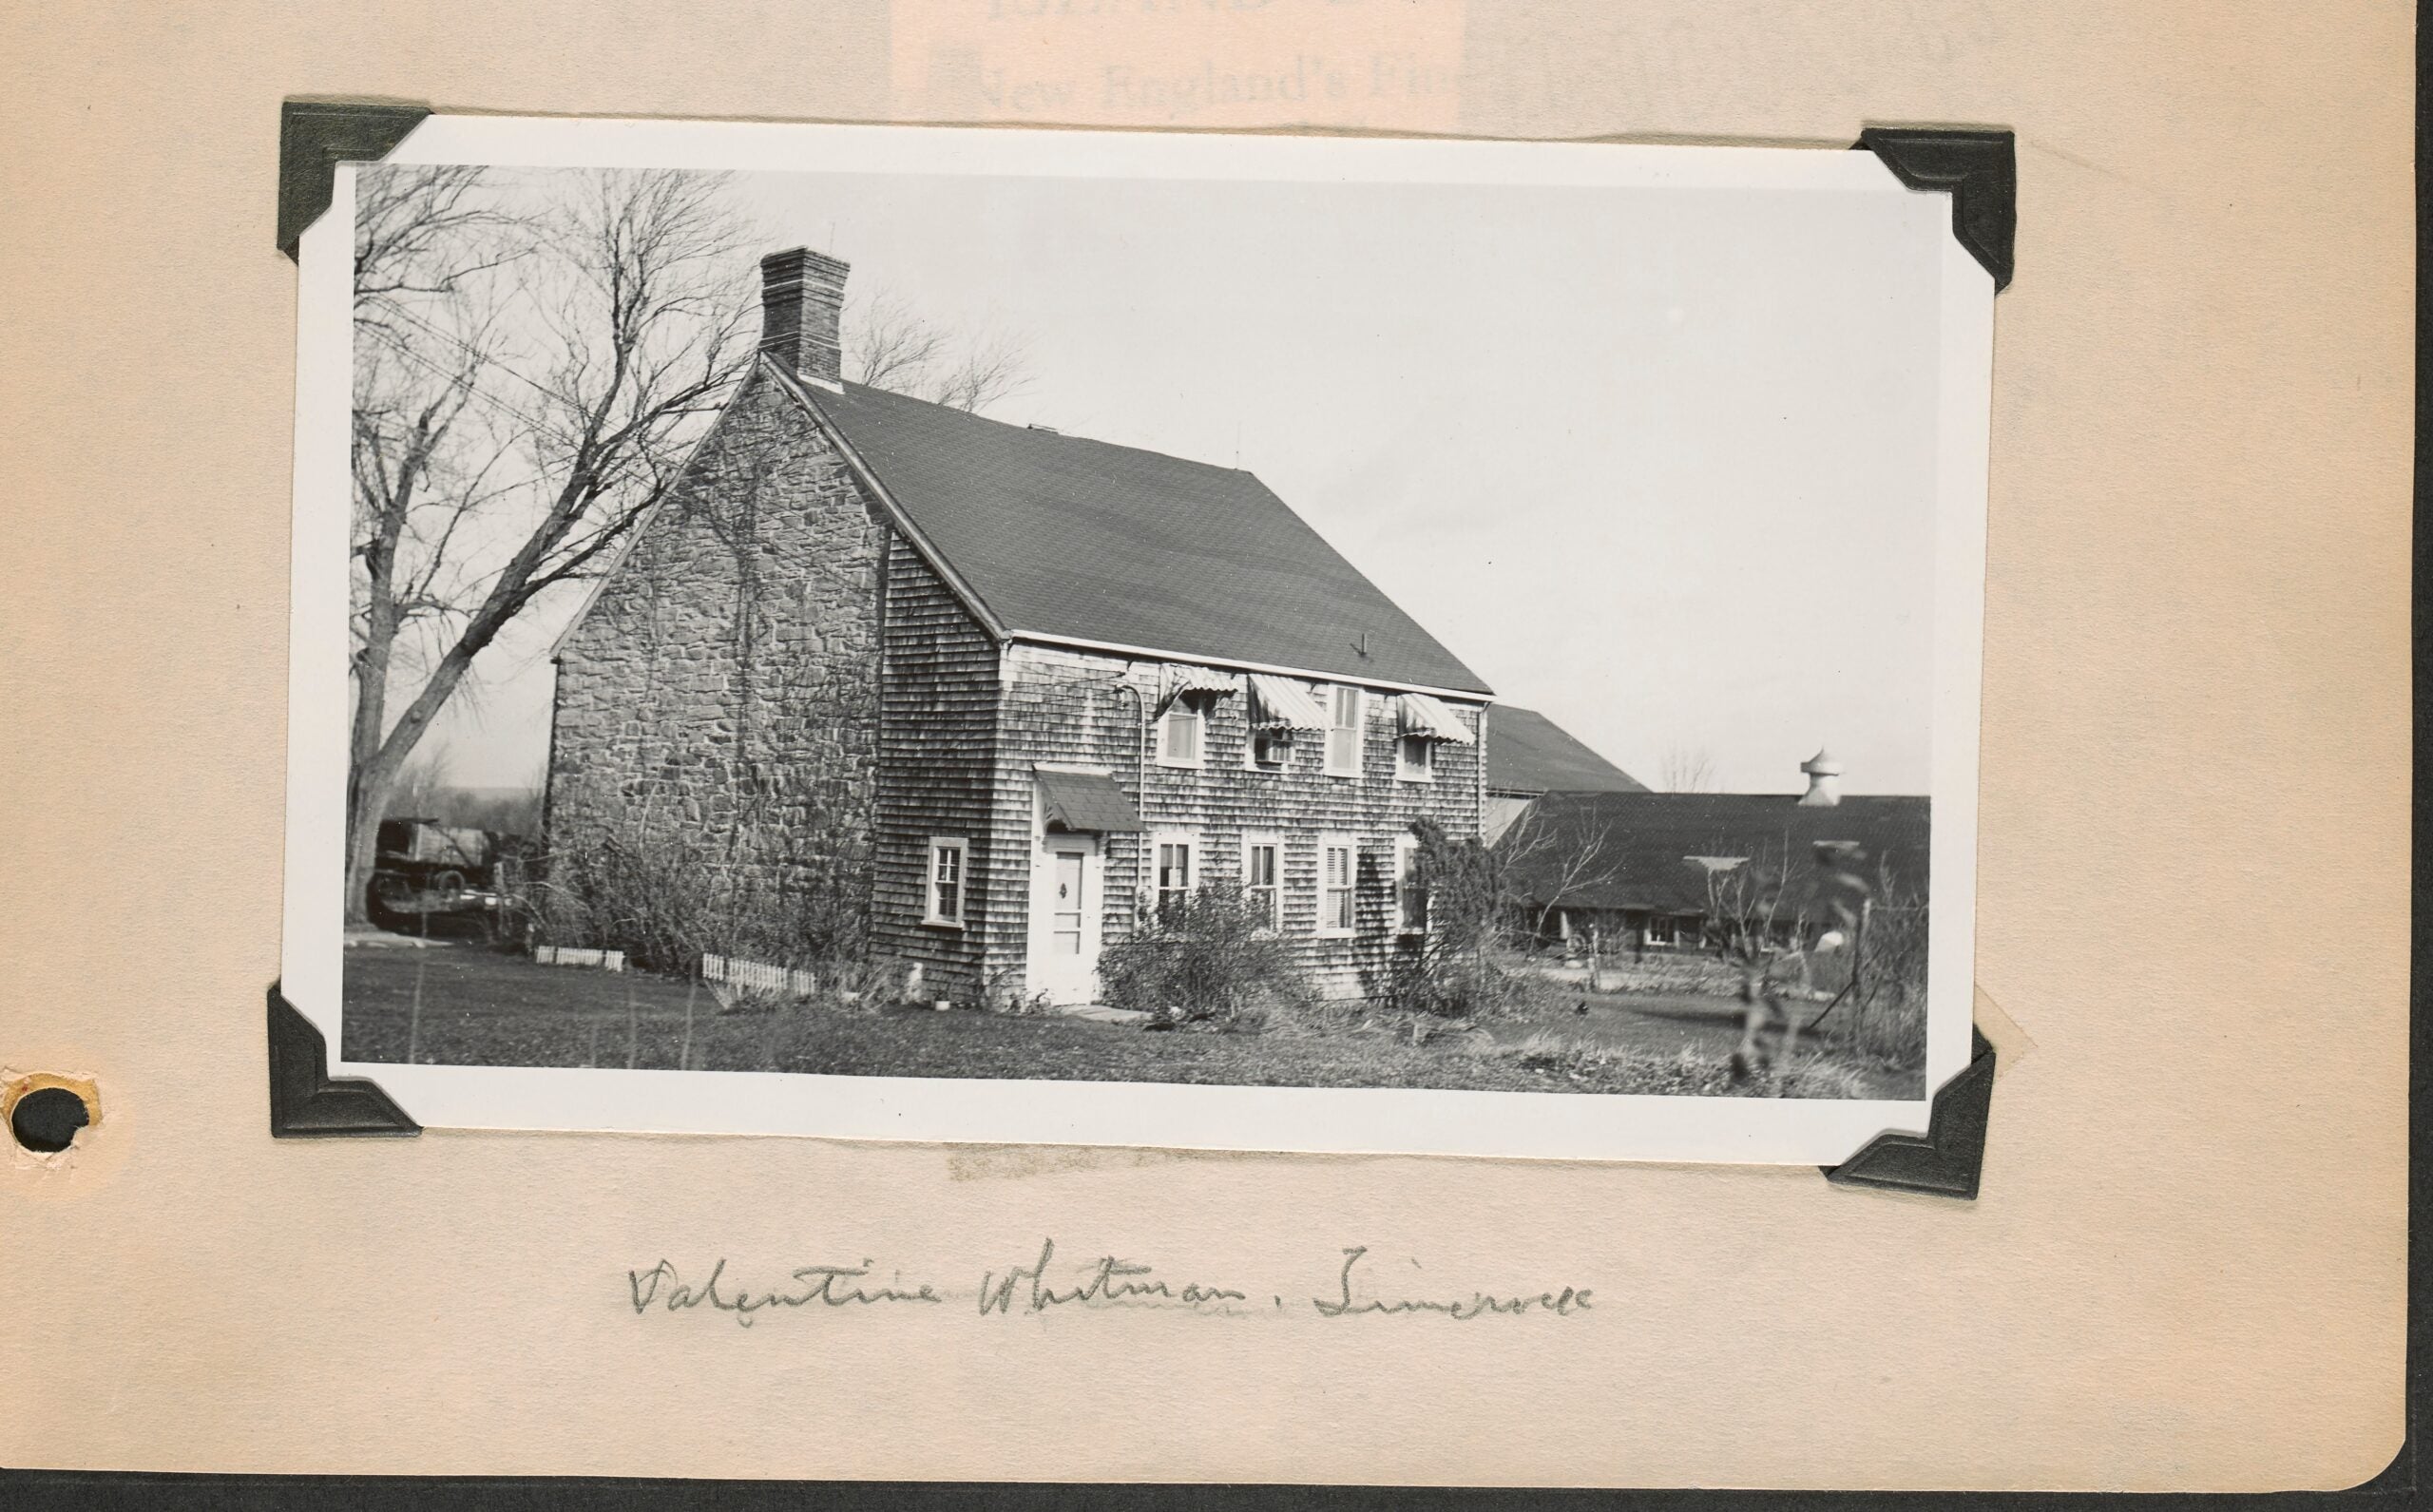 Photographs of the Eleazer Whipple House and the Valentine Whitman House in Limerock